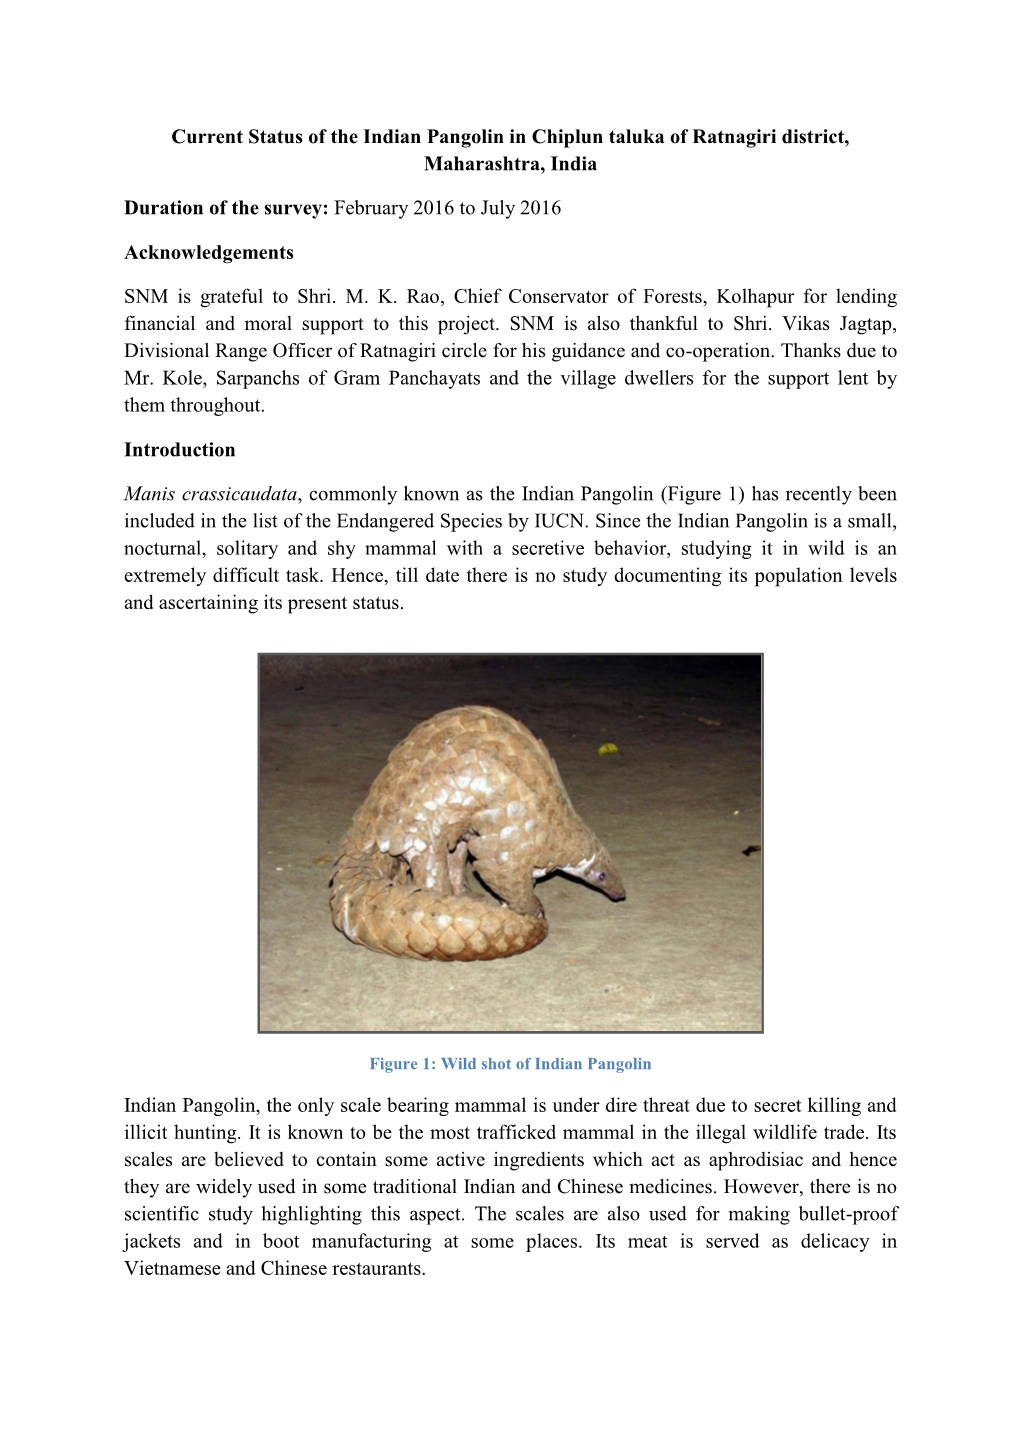 Current Status of the Indian Pangolin in Chiplun Taluka of Ratnagiri District, Maharashtra, India Duration of the Survey